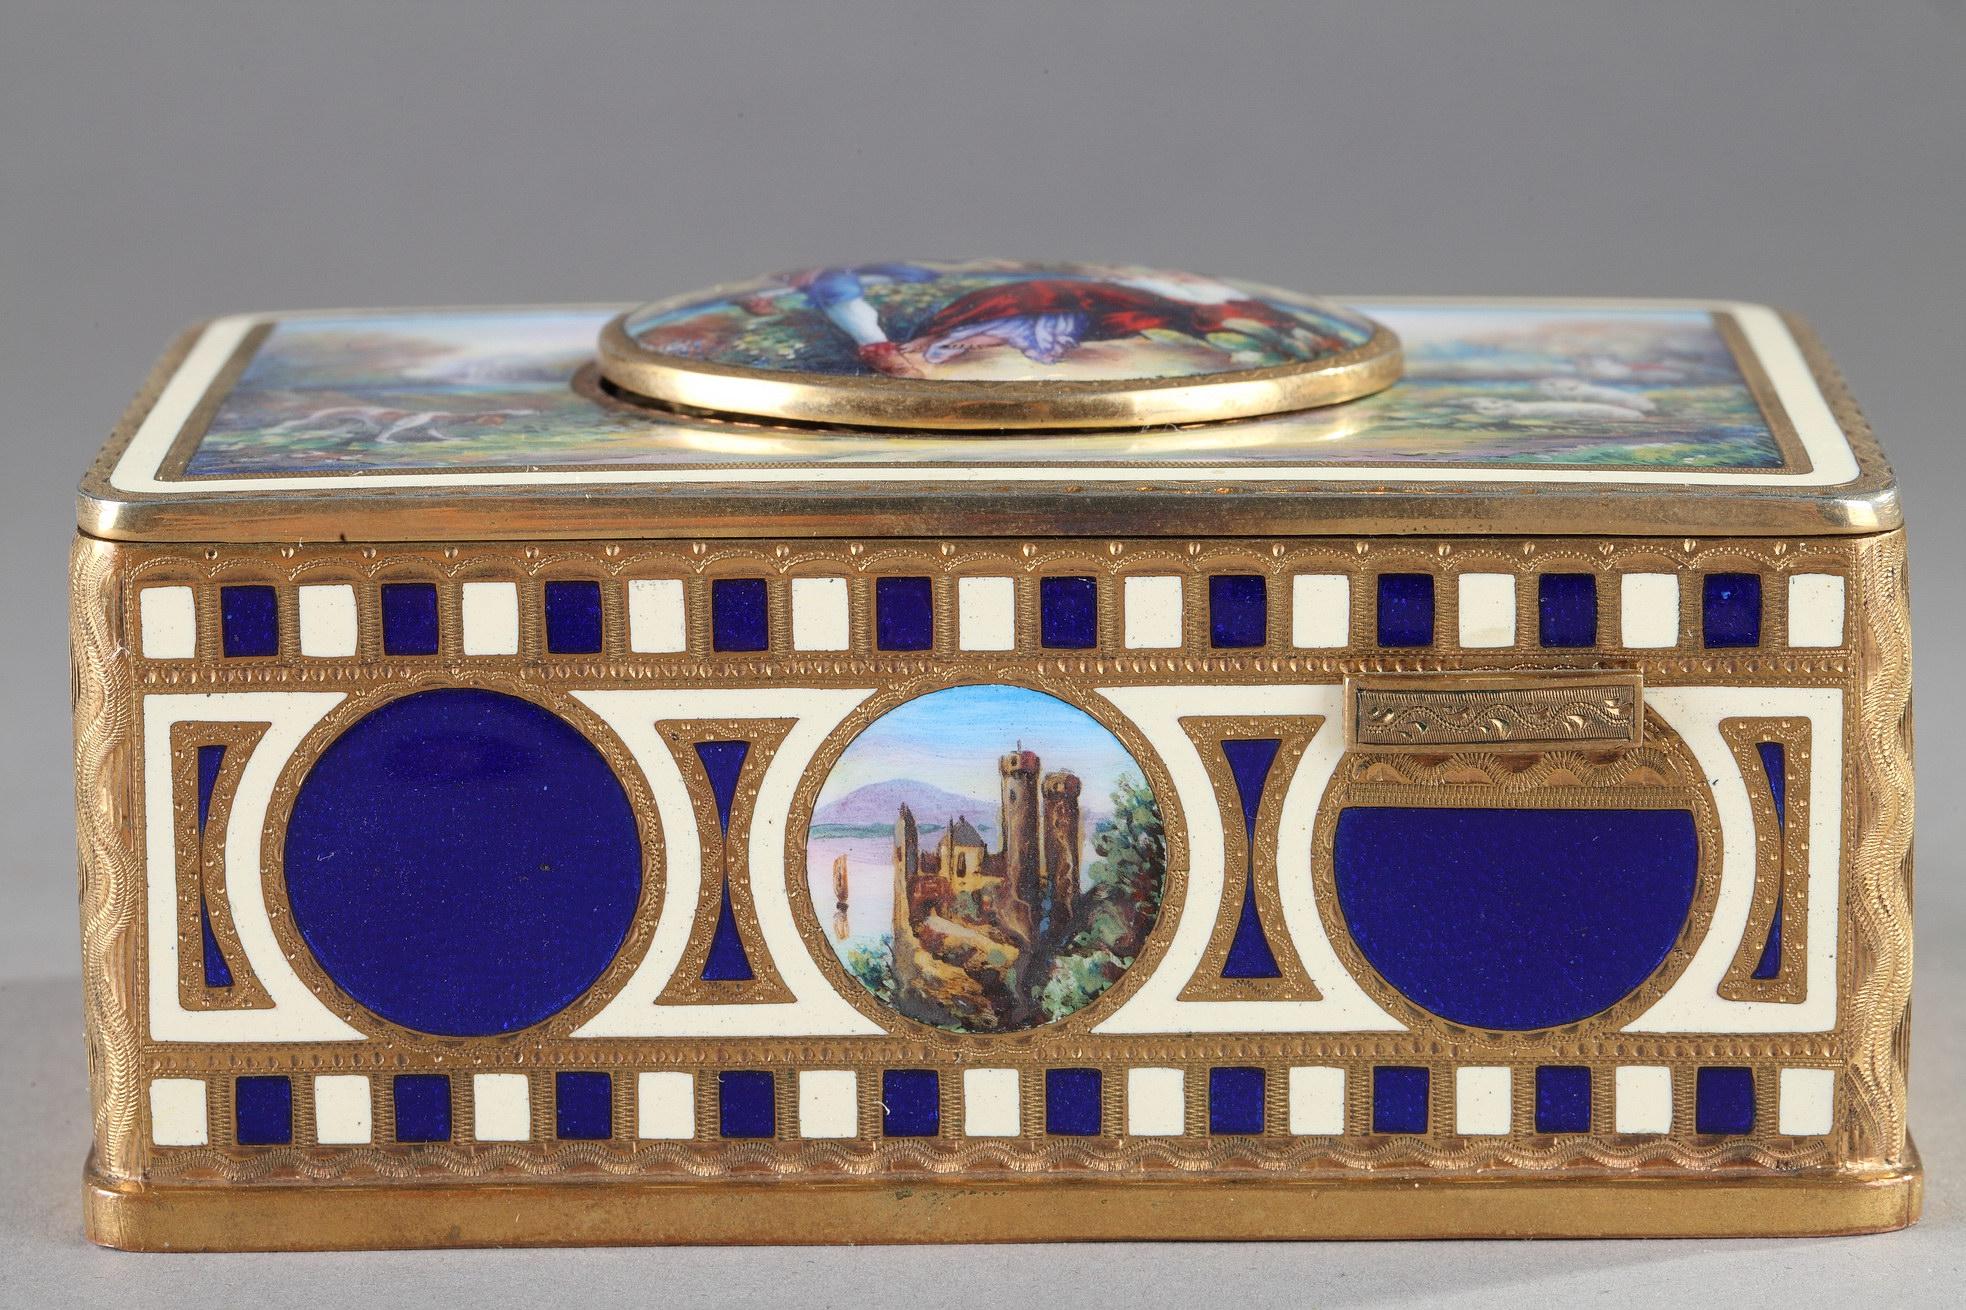 Rectangular music box in gilded brass and polychrome enamel. The music box is adorned on the sides with translucent blue enamel panels and medallions depicting representing an alpine lakescape with medieval castles. The lid is decorated with a scene